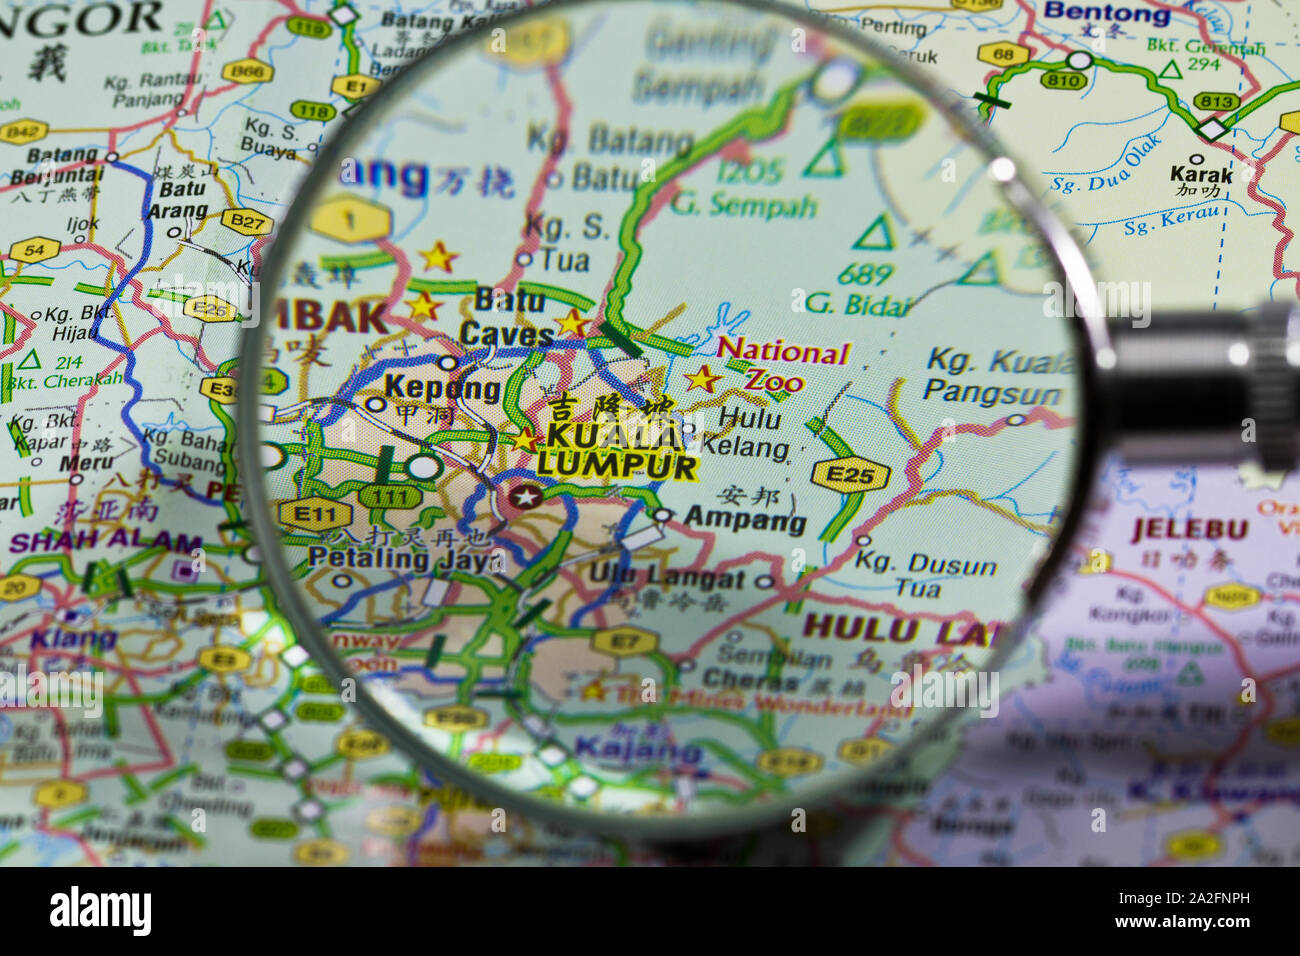 Tourism Map Of Malaysia With Magnifying Glass Stock Photo Alamy